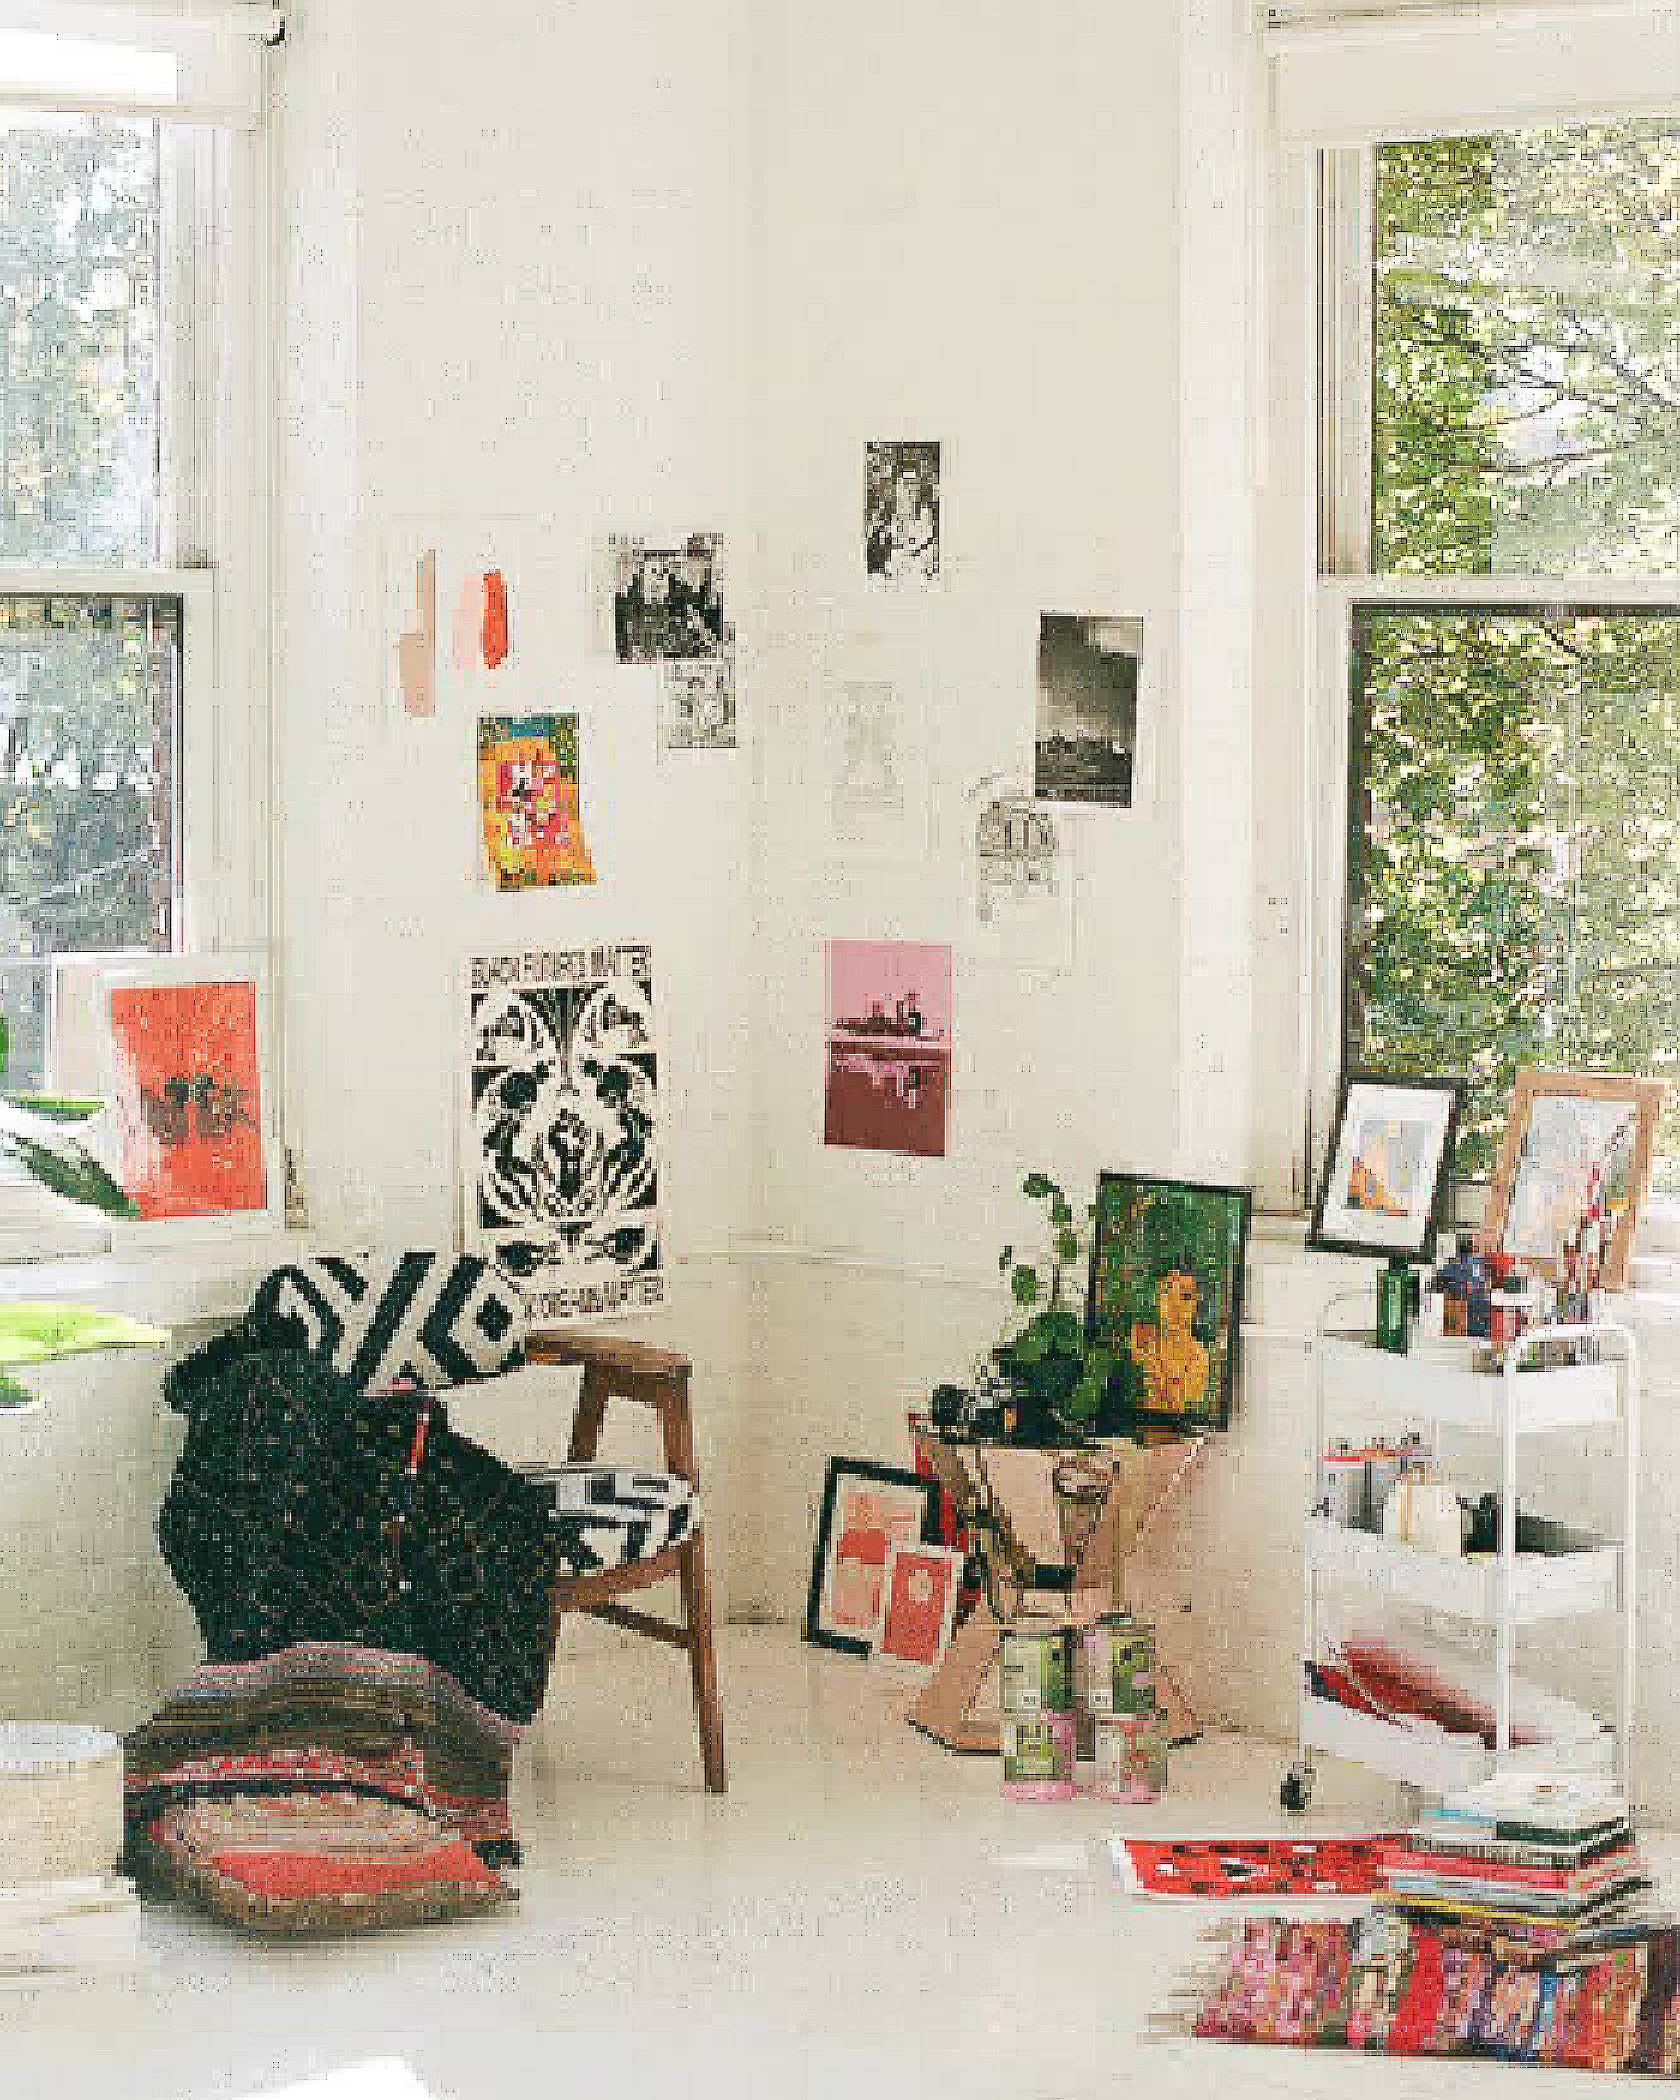 GIFs of Salomée Souag working on various art pieces in her studio.